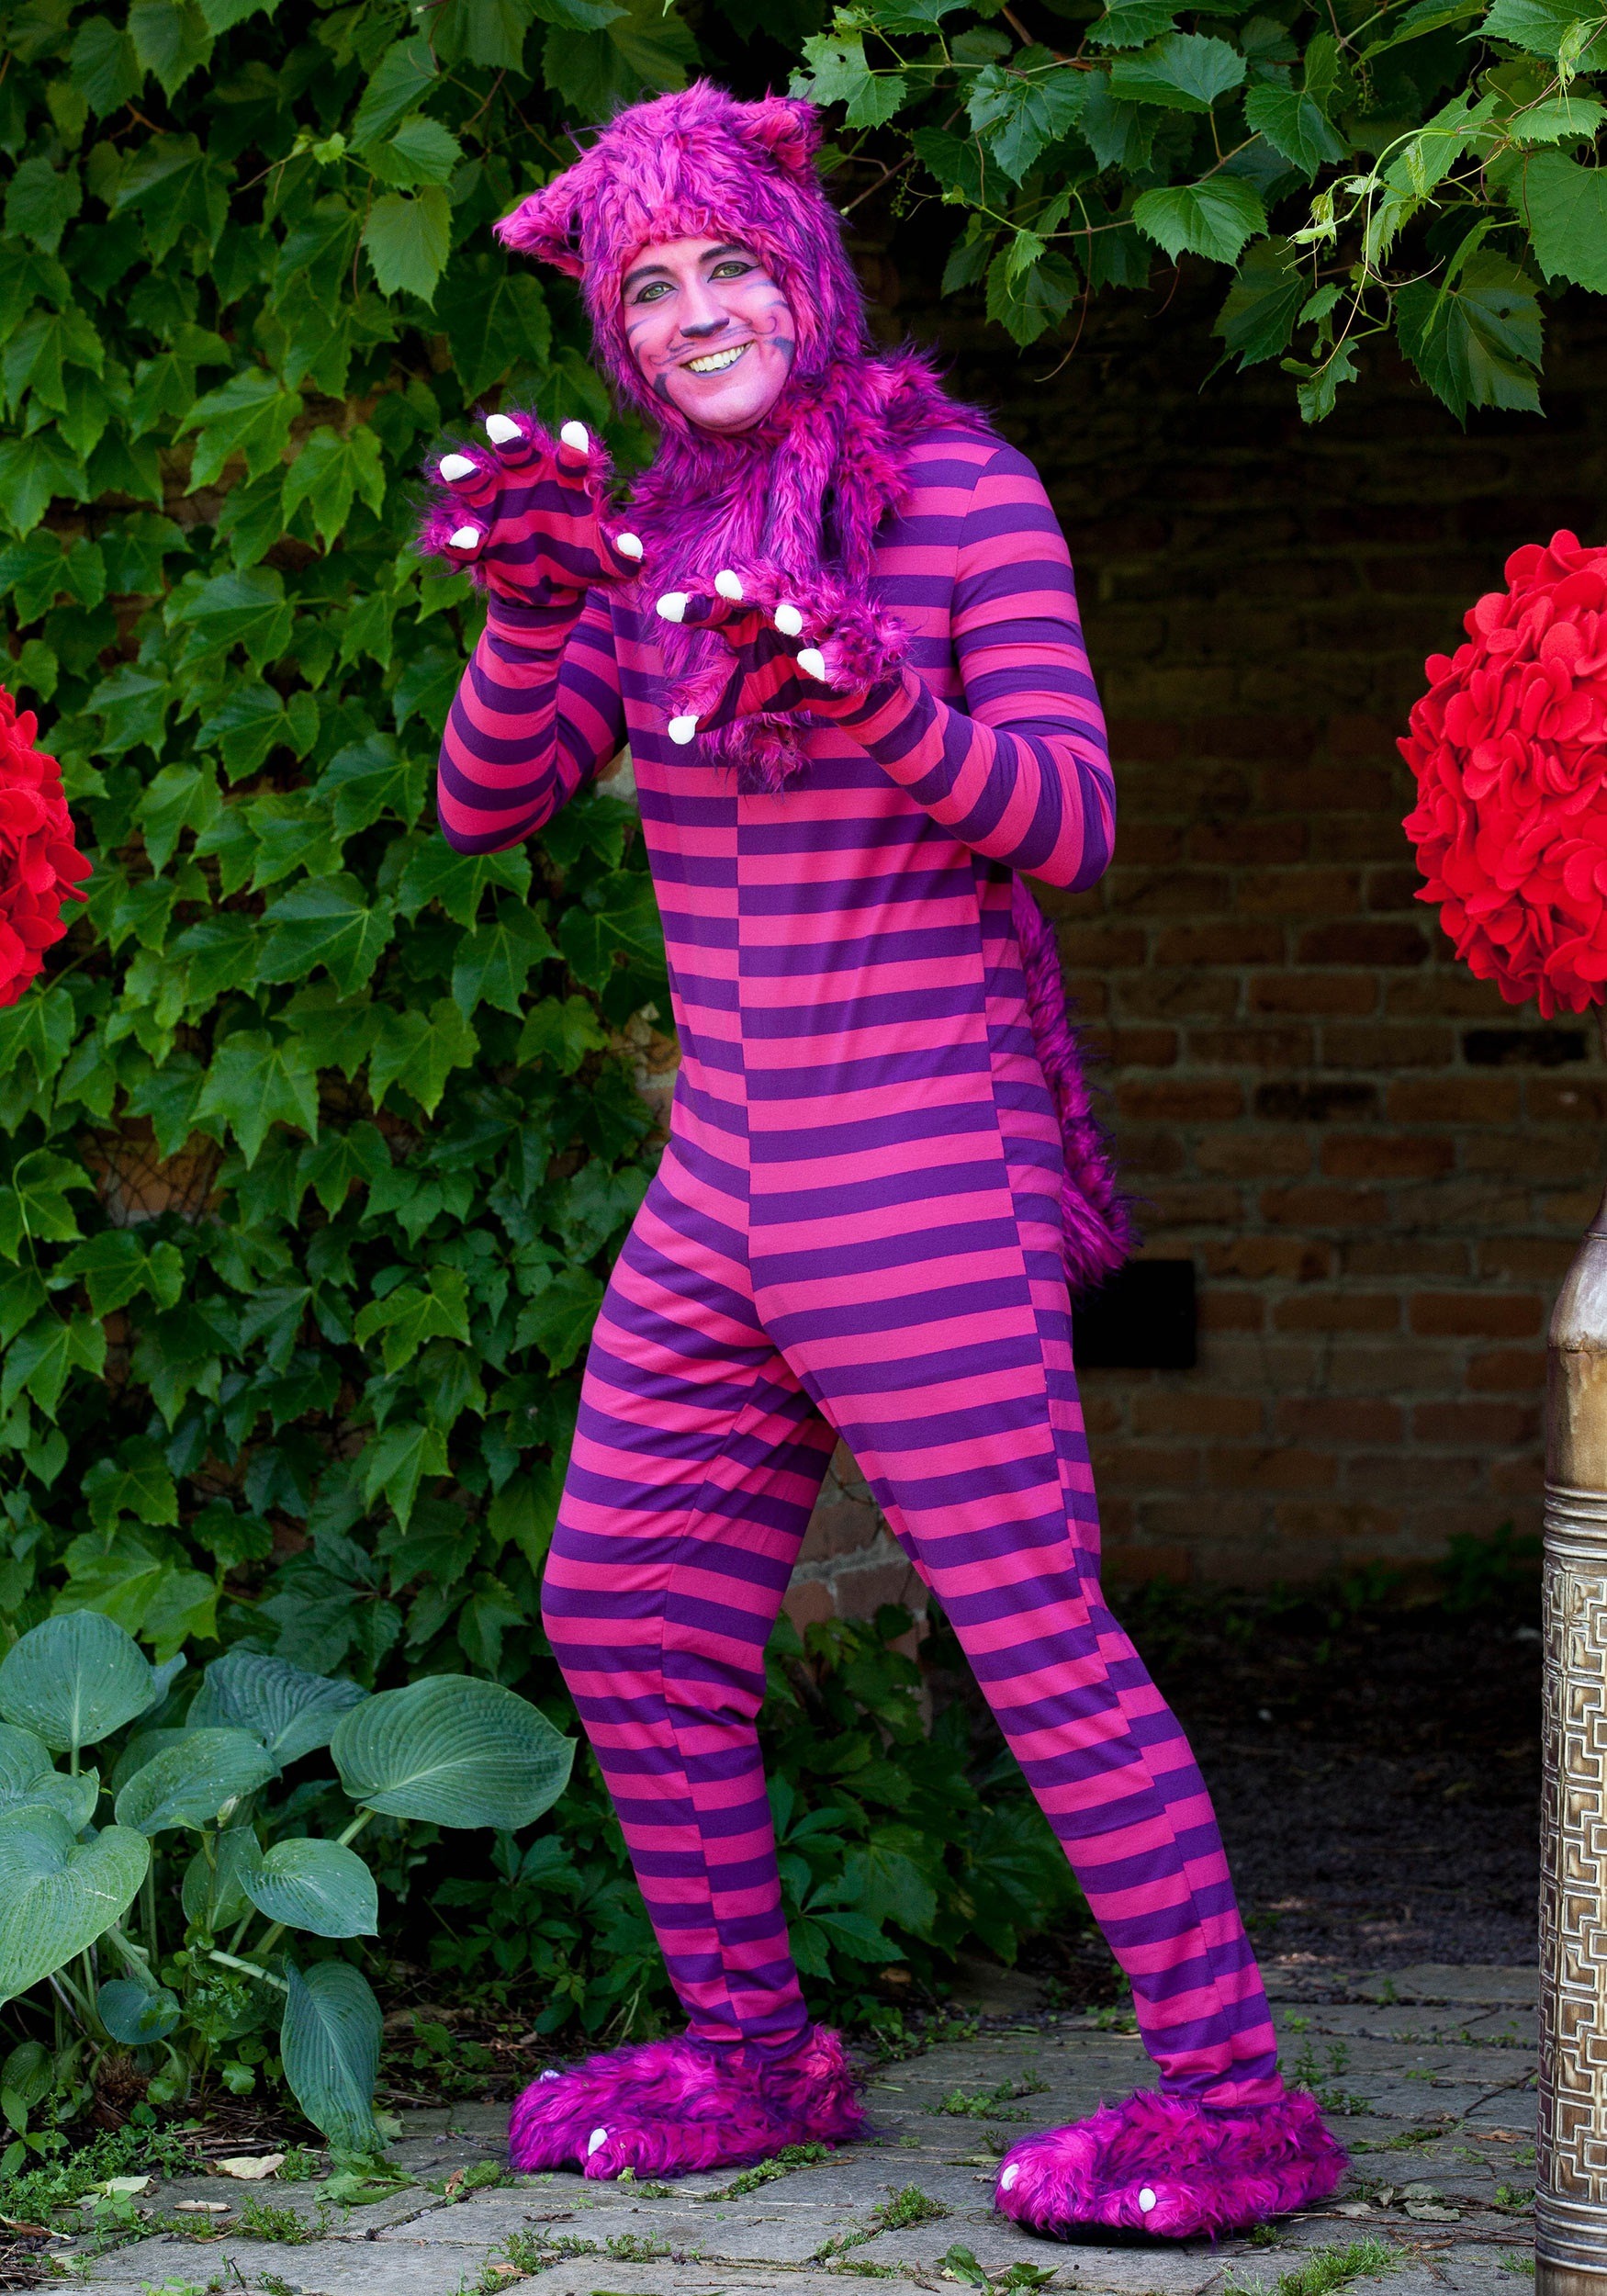 Deluxe Adult Cheshire Cat Fancy Dress Costume